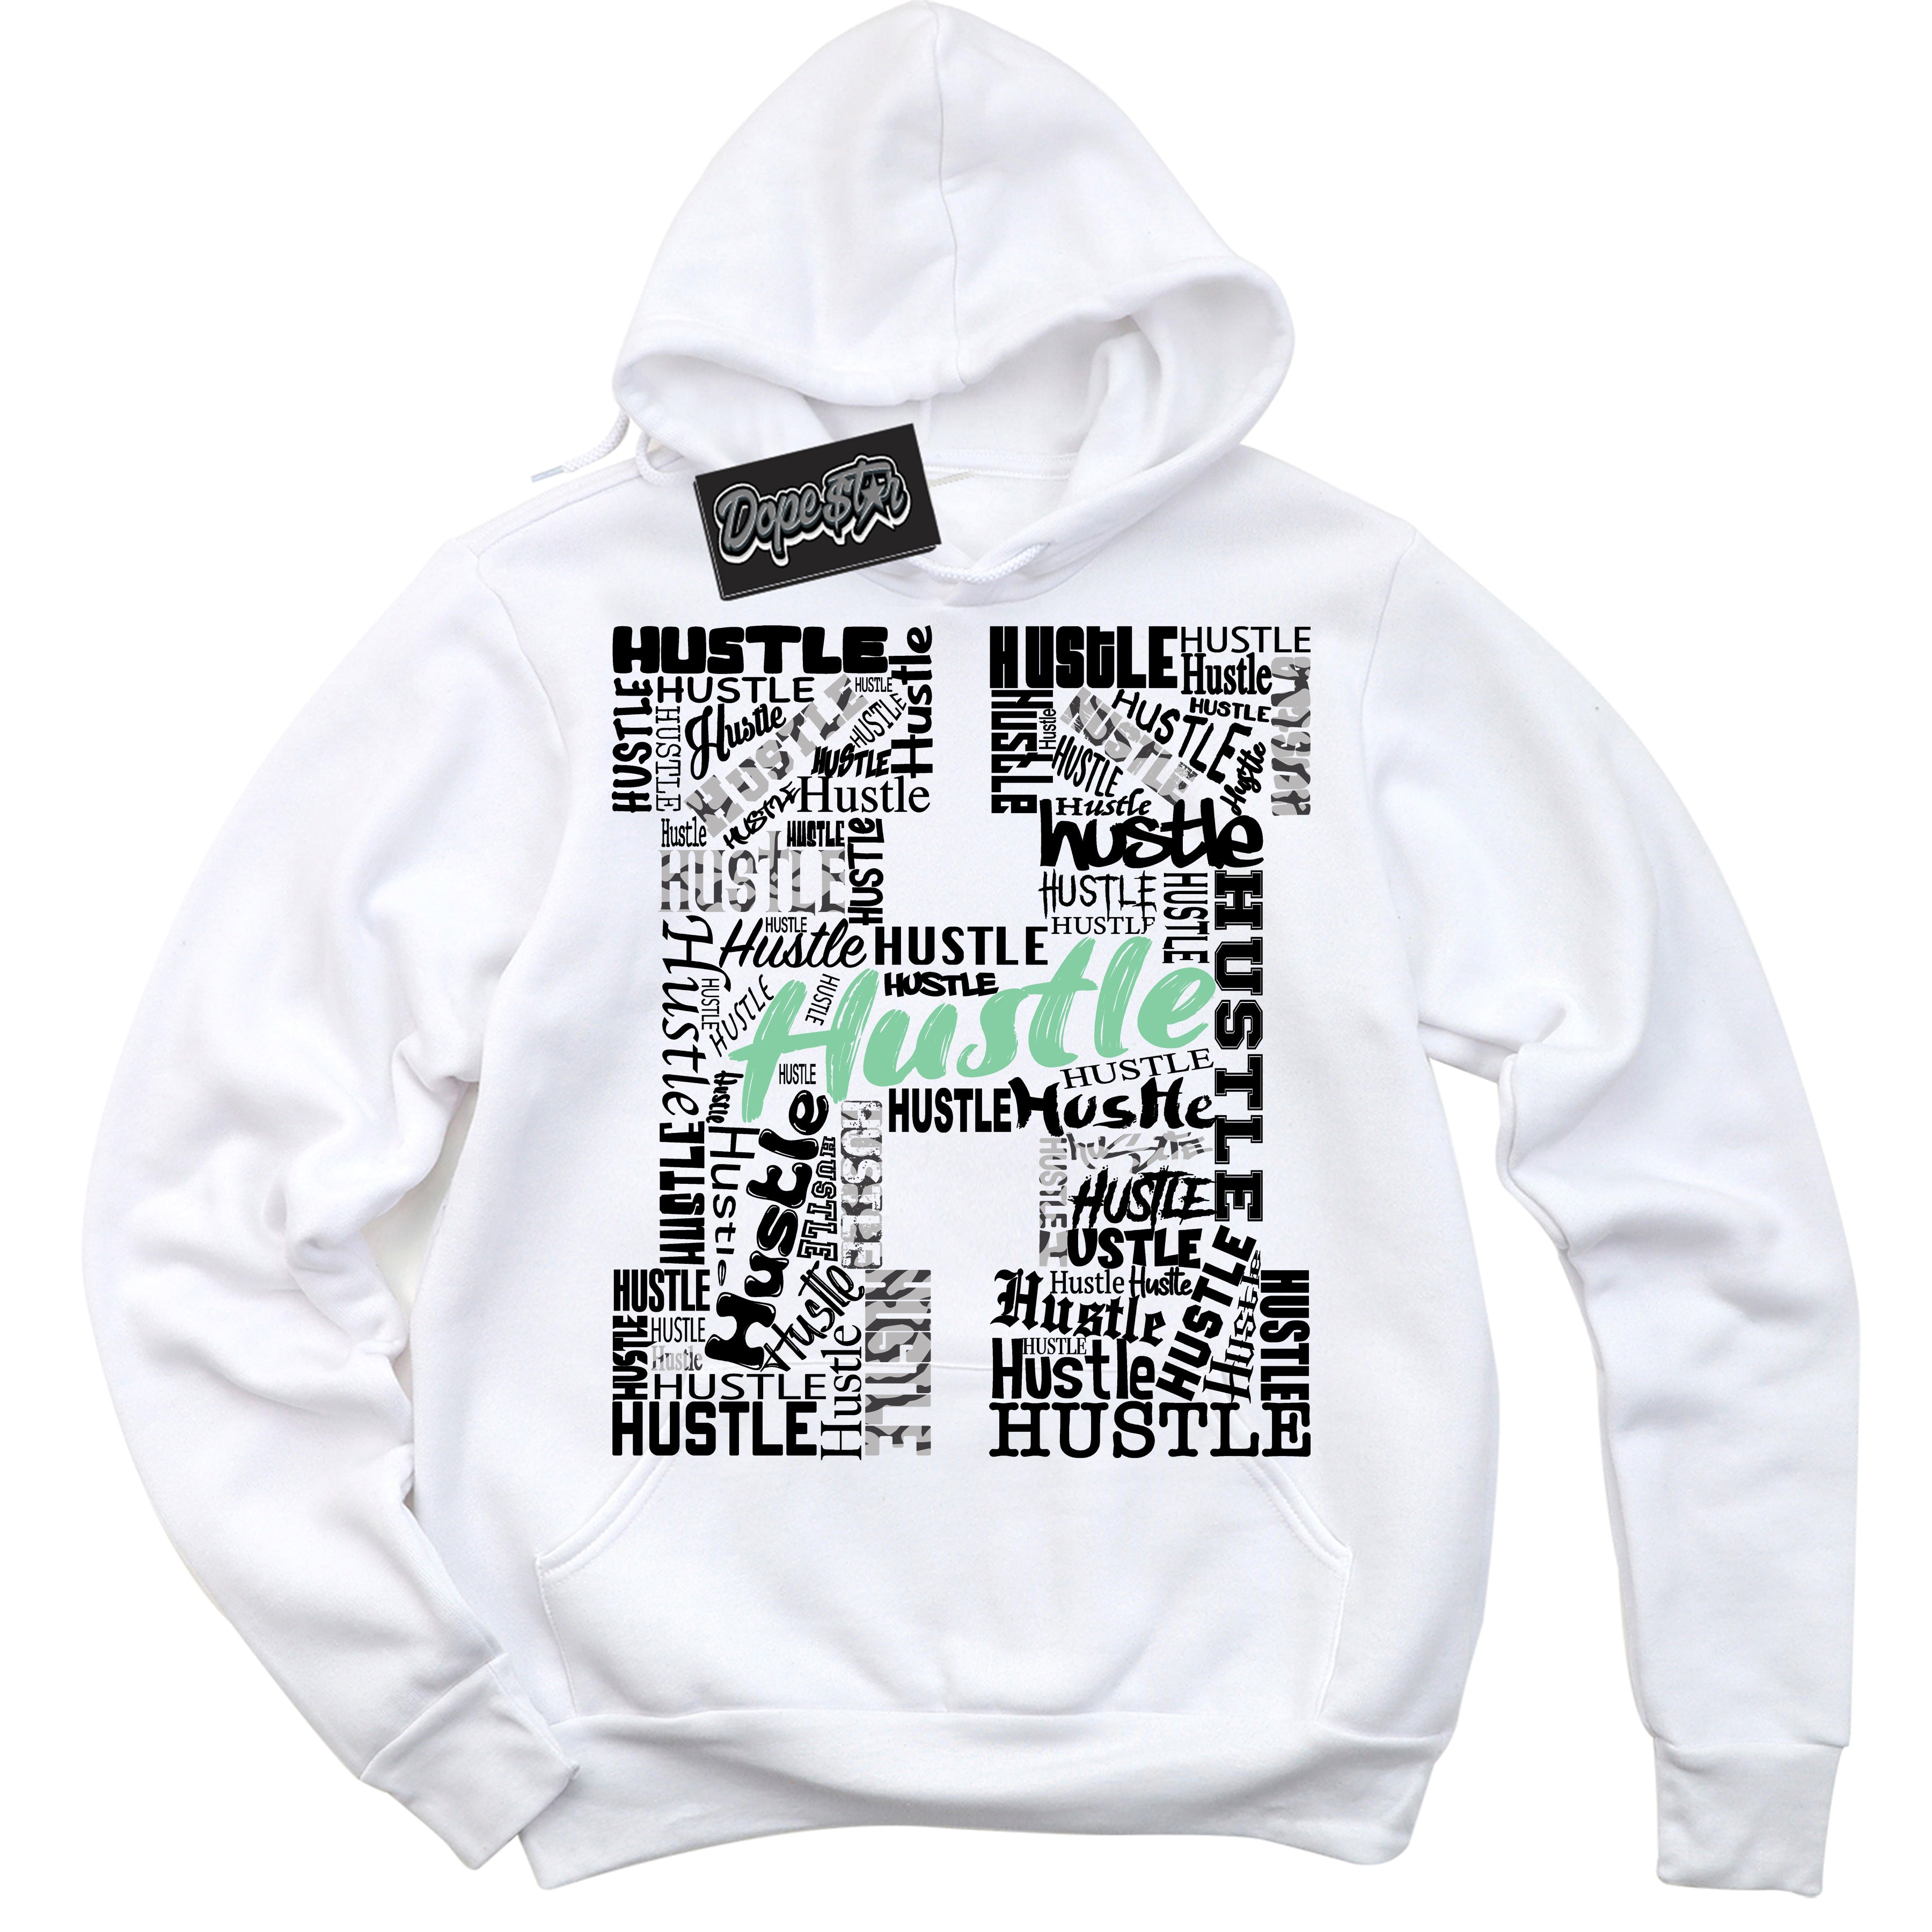 Cool White Graphic DopeStar Hoodie with “ Hustle “ print, that perfectly matches Green Glow 3s sneakers